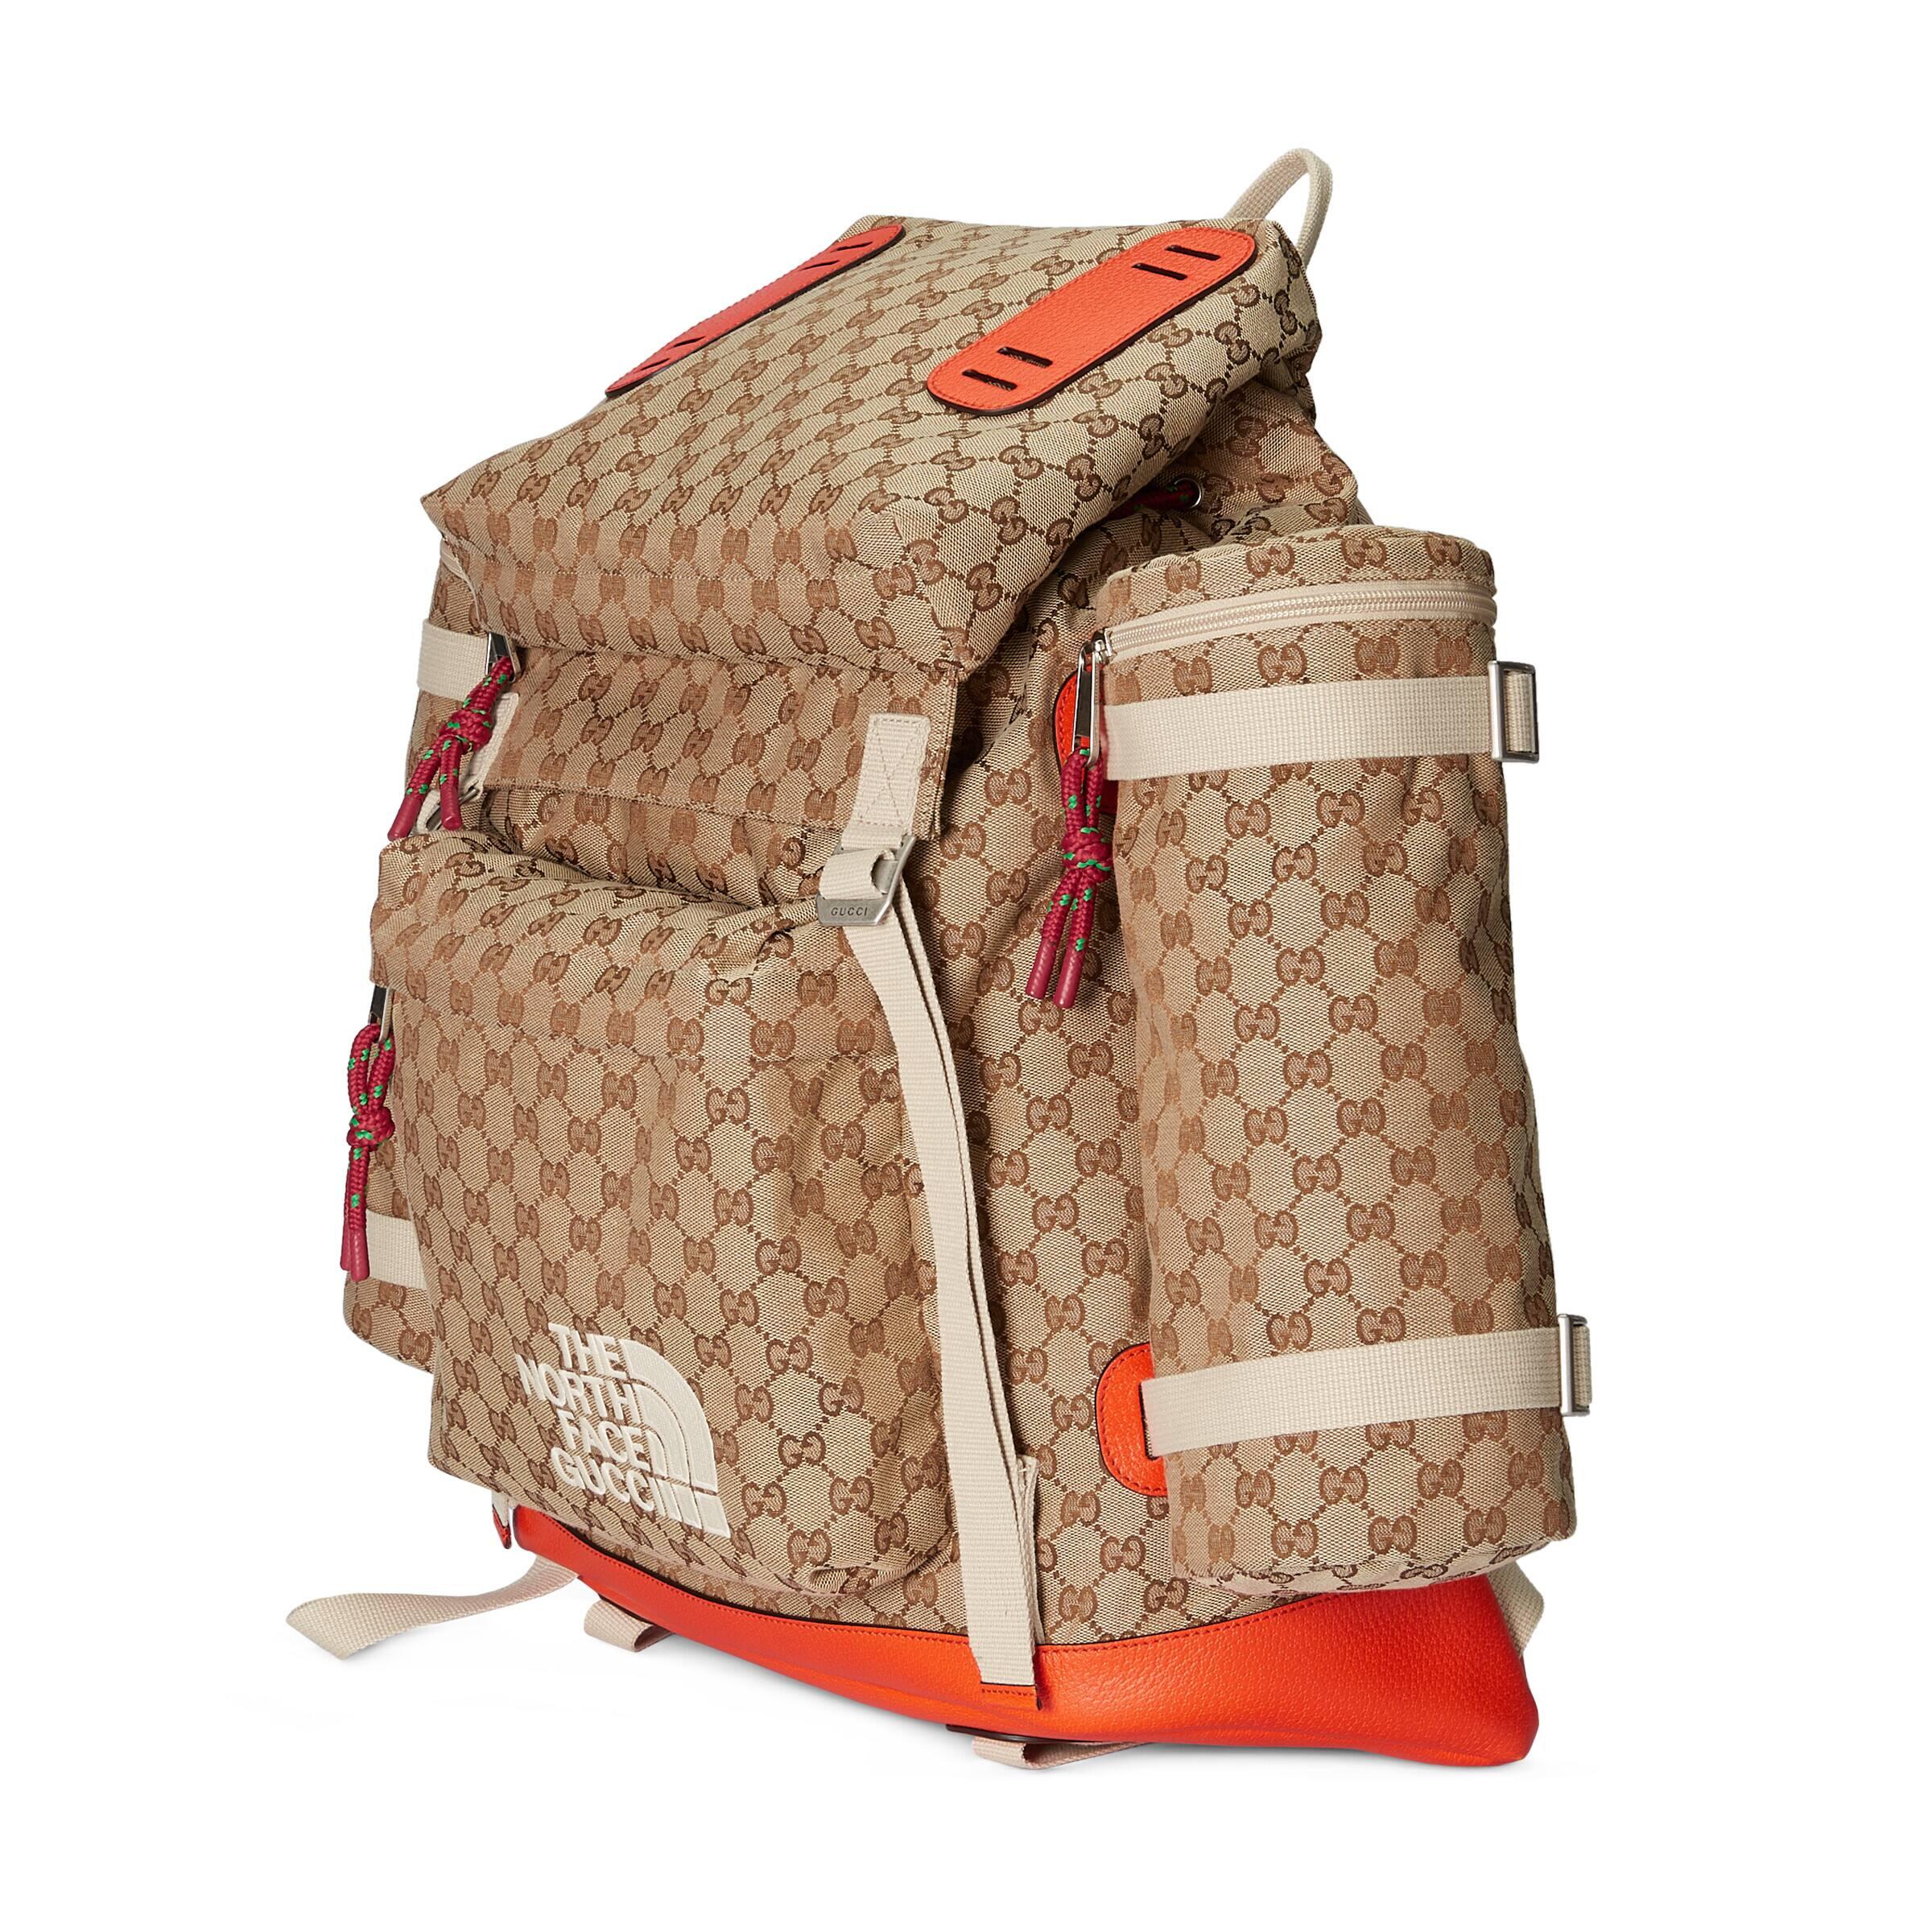 Gucci The North Face X Backpack in Brown for Men